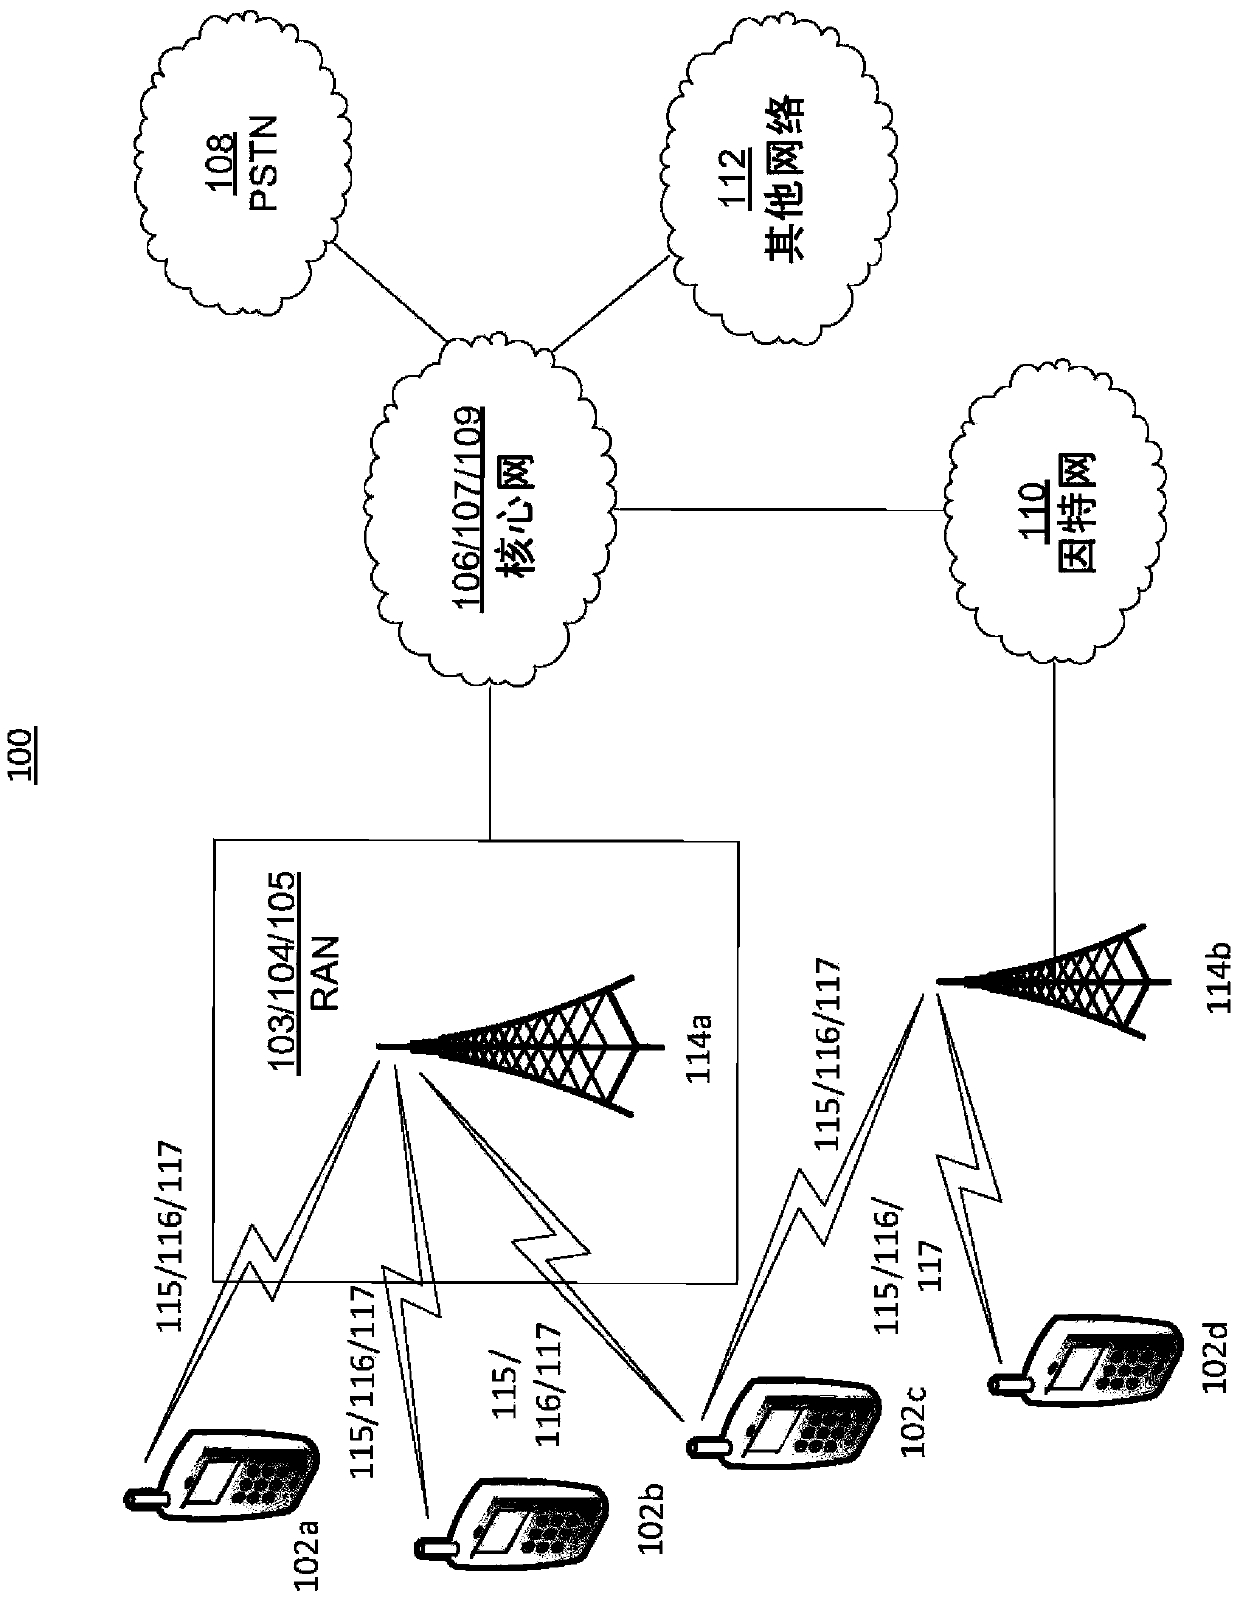 Relay Node Interface-Related Layer 2 Measurements and Relay Node Handling in Network Load Balancing